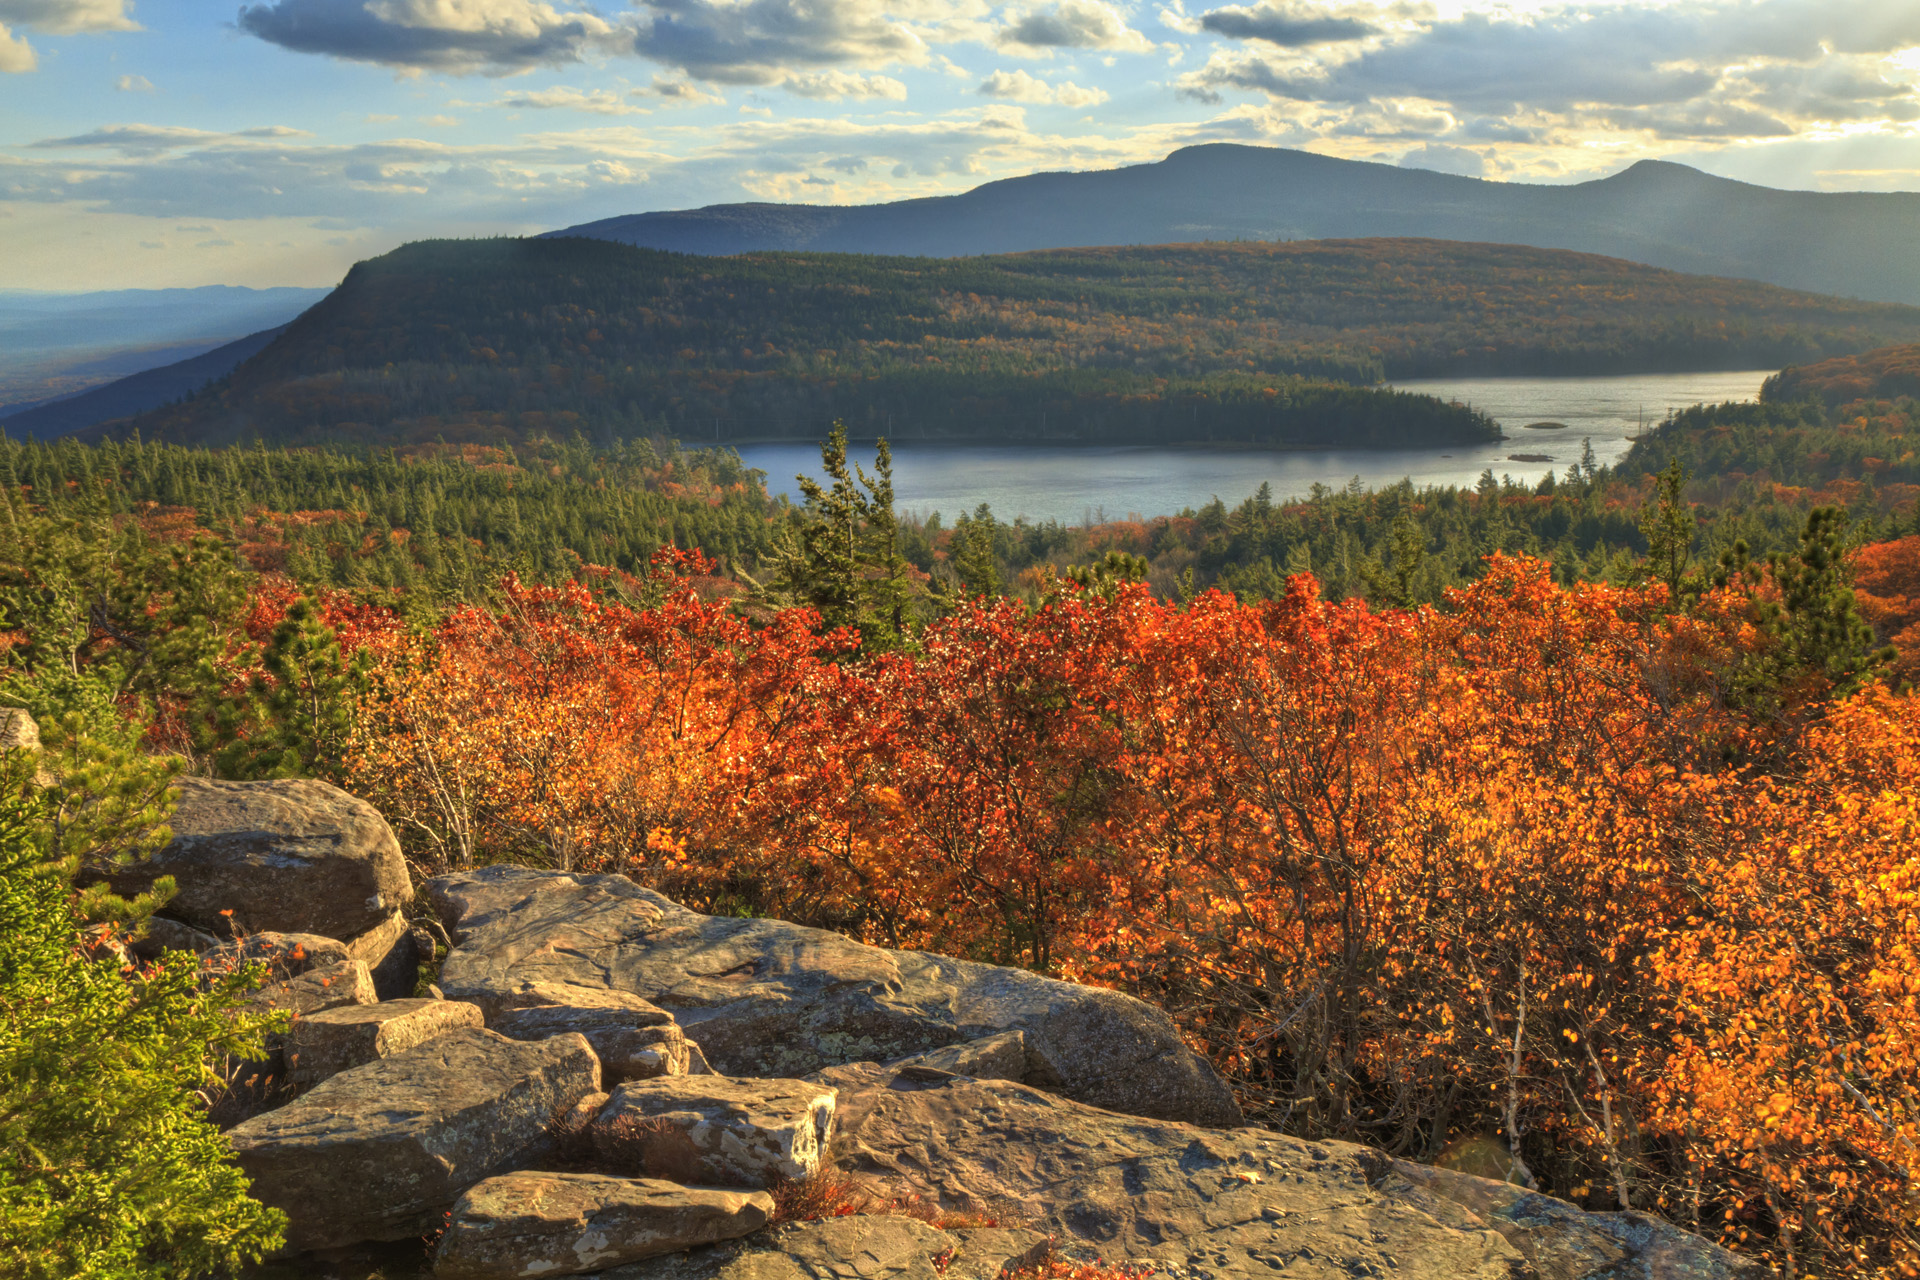 "Afternoon sun on sunset rock in the Autumn, overlooking North-South Lake in the Catskills Mountains of New York. (HDR)."